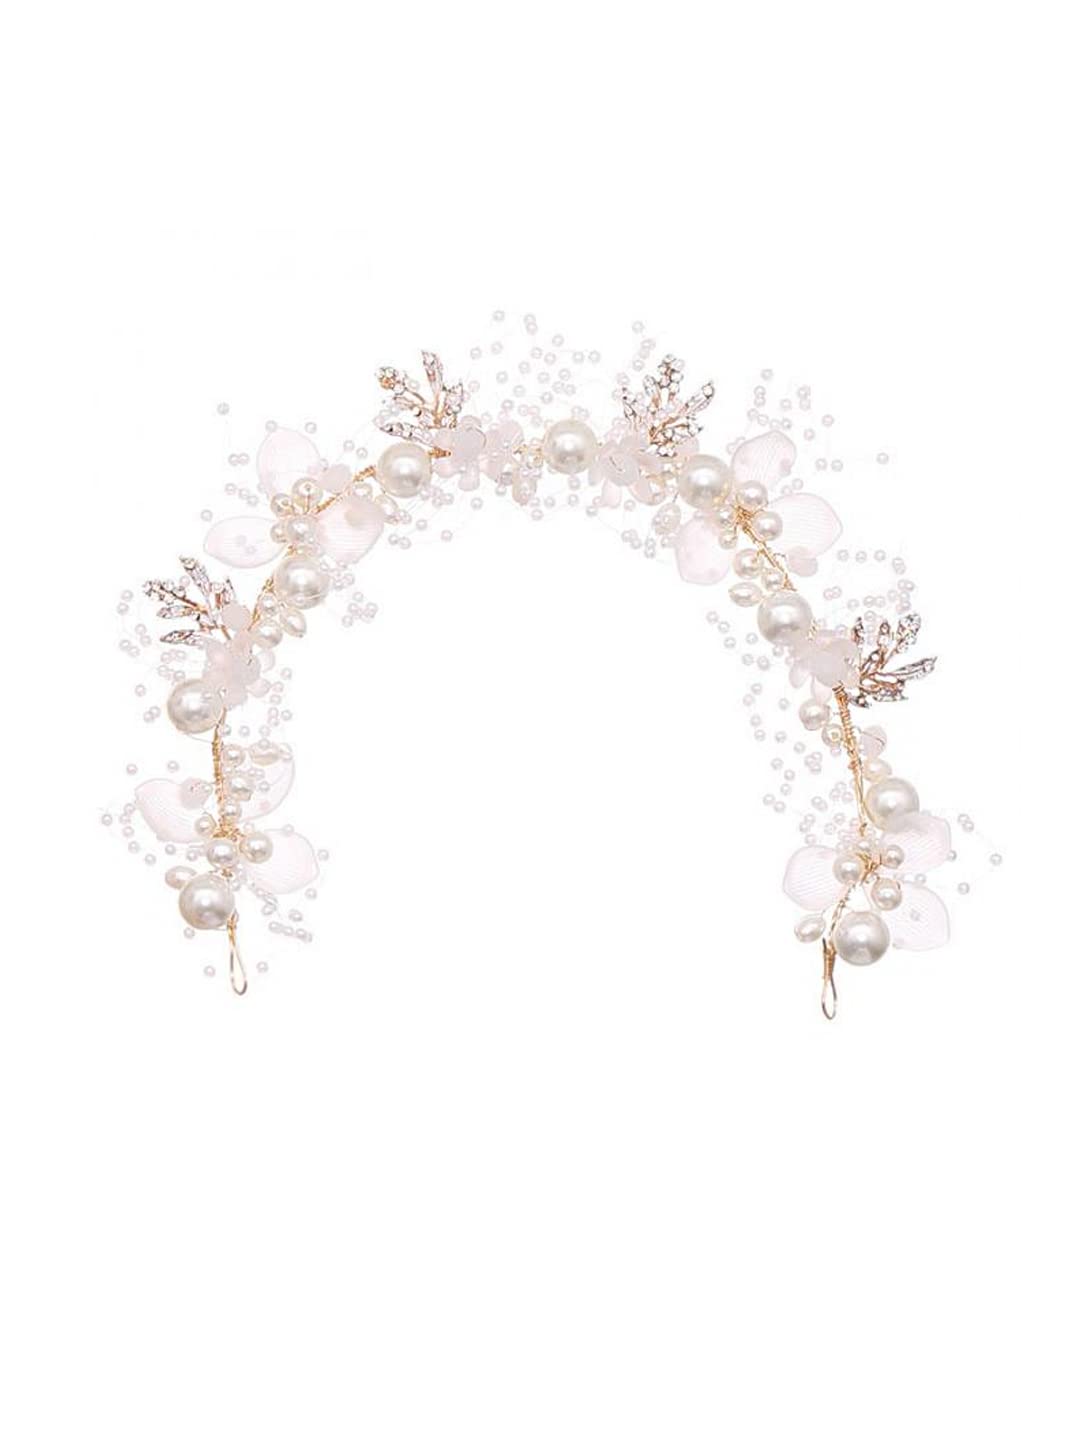 Yellow Chimes Bridal Hair Vine for Women and Girls Bridal Hair Accessories for Wedding White Headband Hair Accessories Wedding Jewellery for Women Floral Pearl Bridal Wedding Head band Hair Vine for Girls